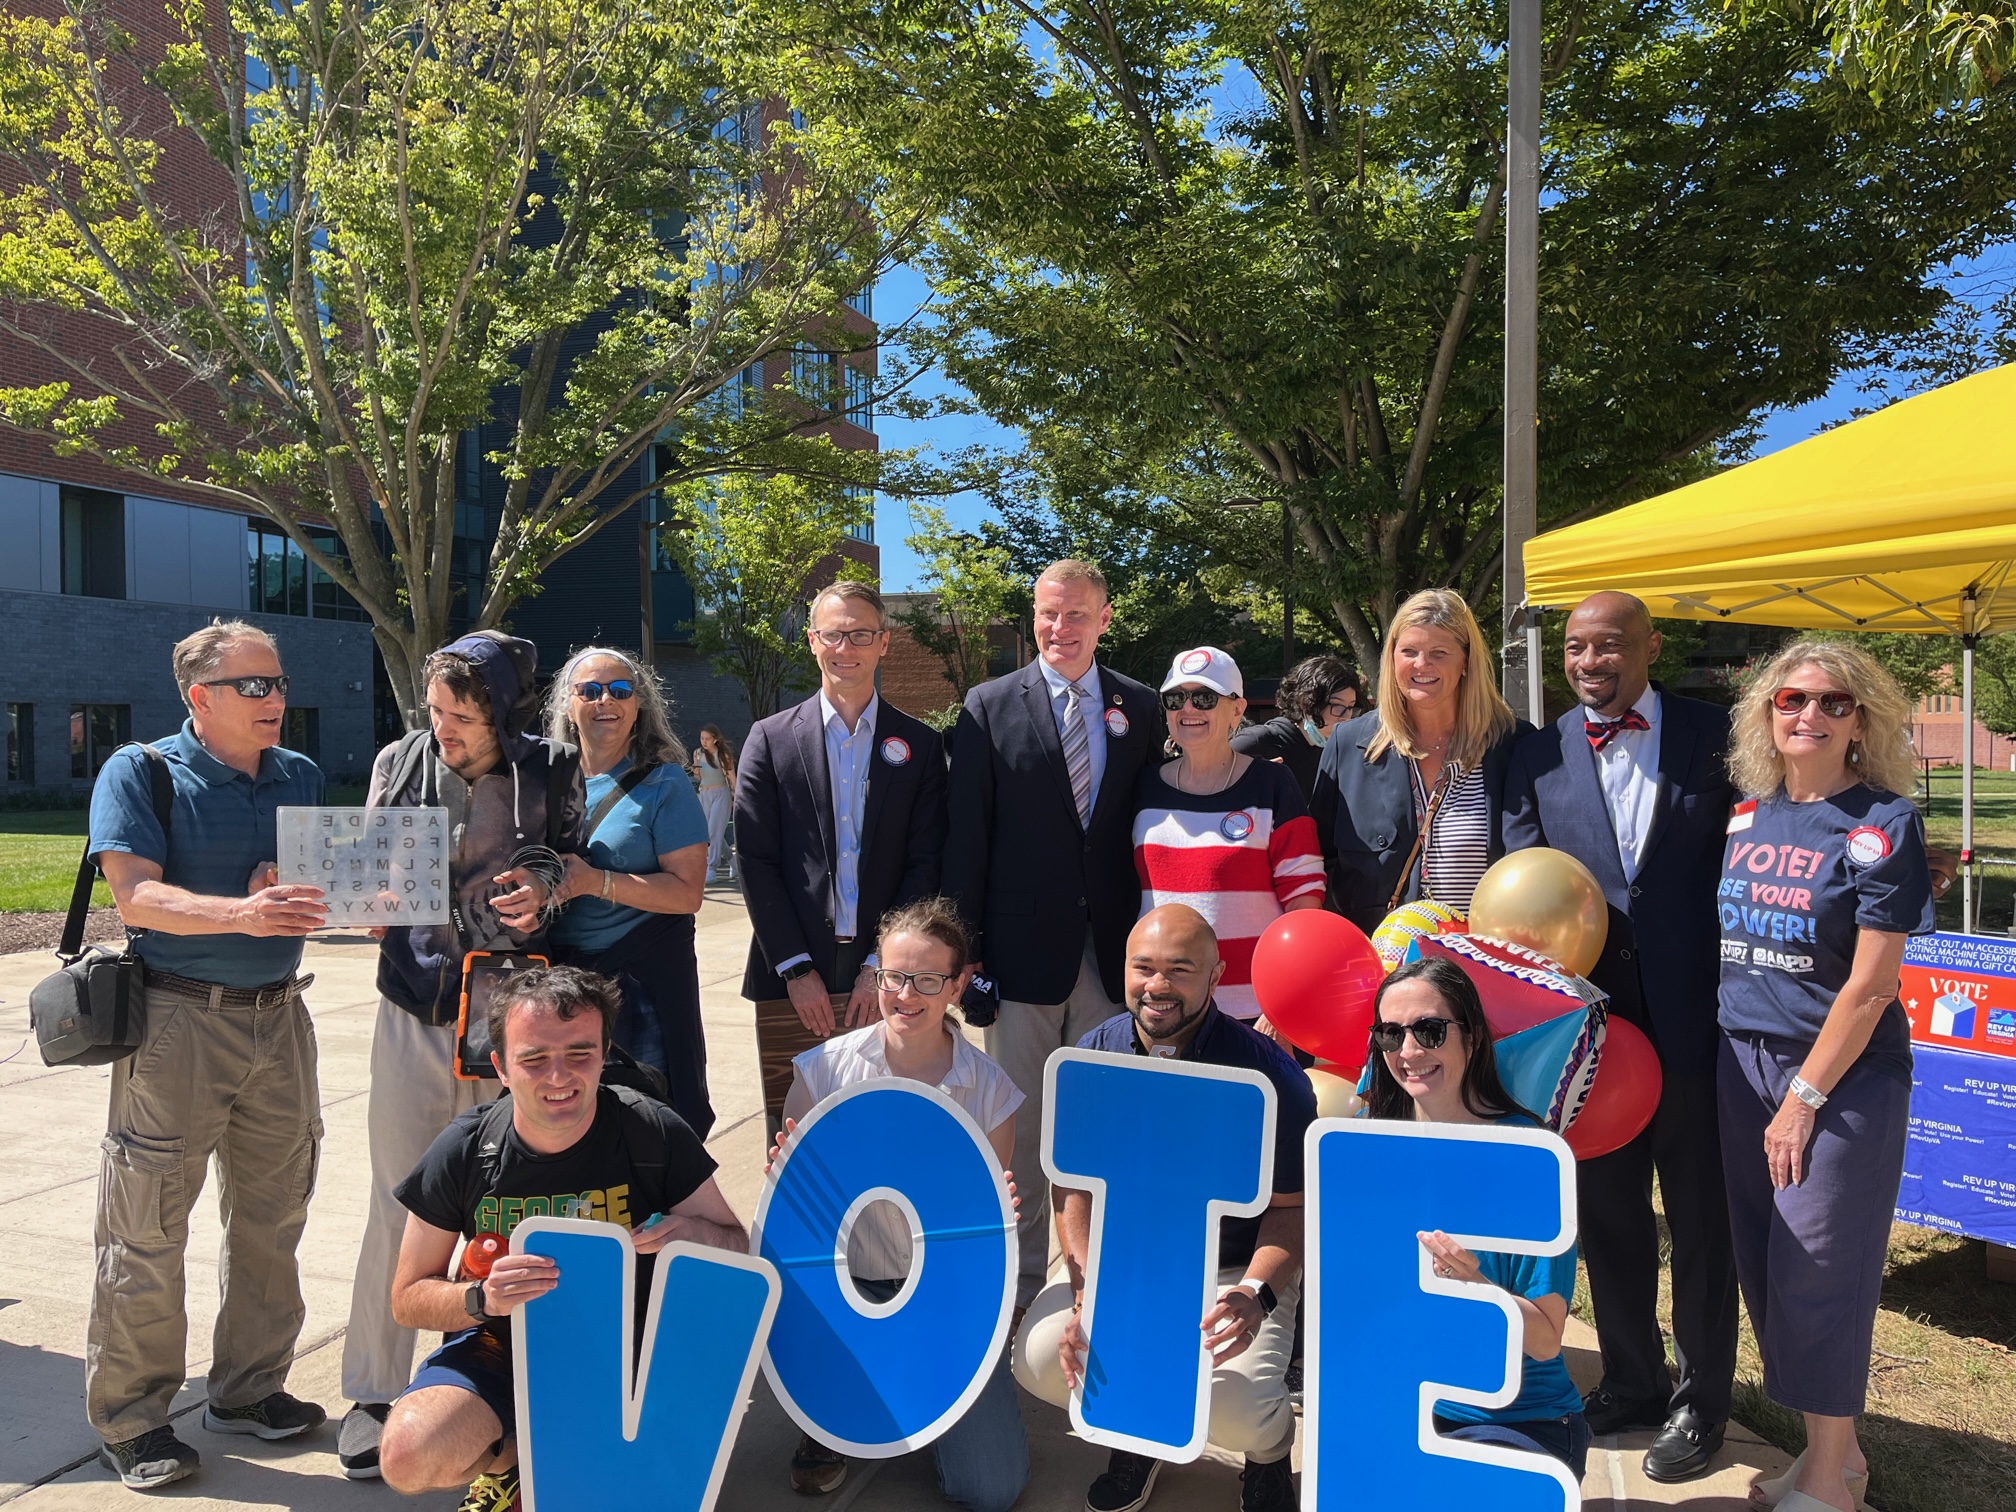 A group of people outdoors posing with large blue letters spelling "VOTE." The group includes men and women of different ages, with some holding balloons and signs. They are standing in front of a yellow tent, with trees and buildings in the background.